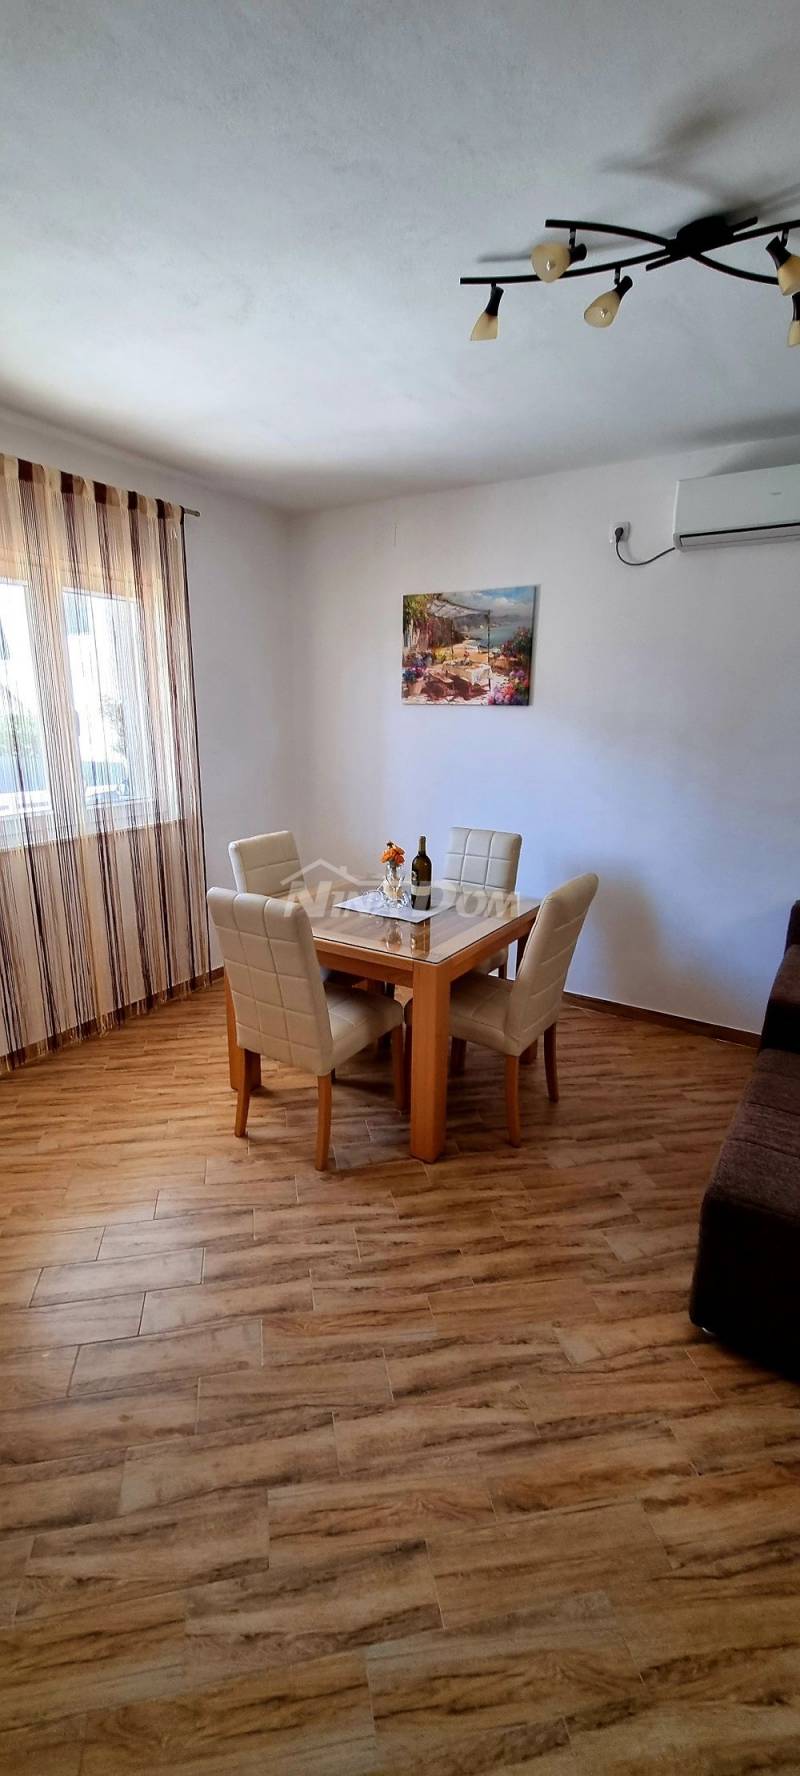 Property with two storey apartments 80 meters from the sea. - 5